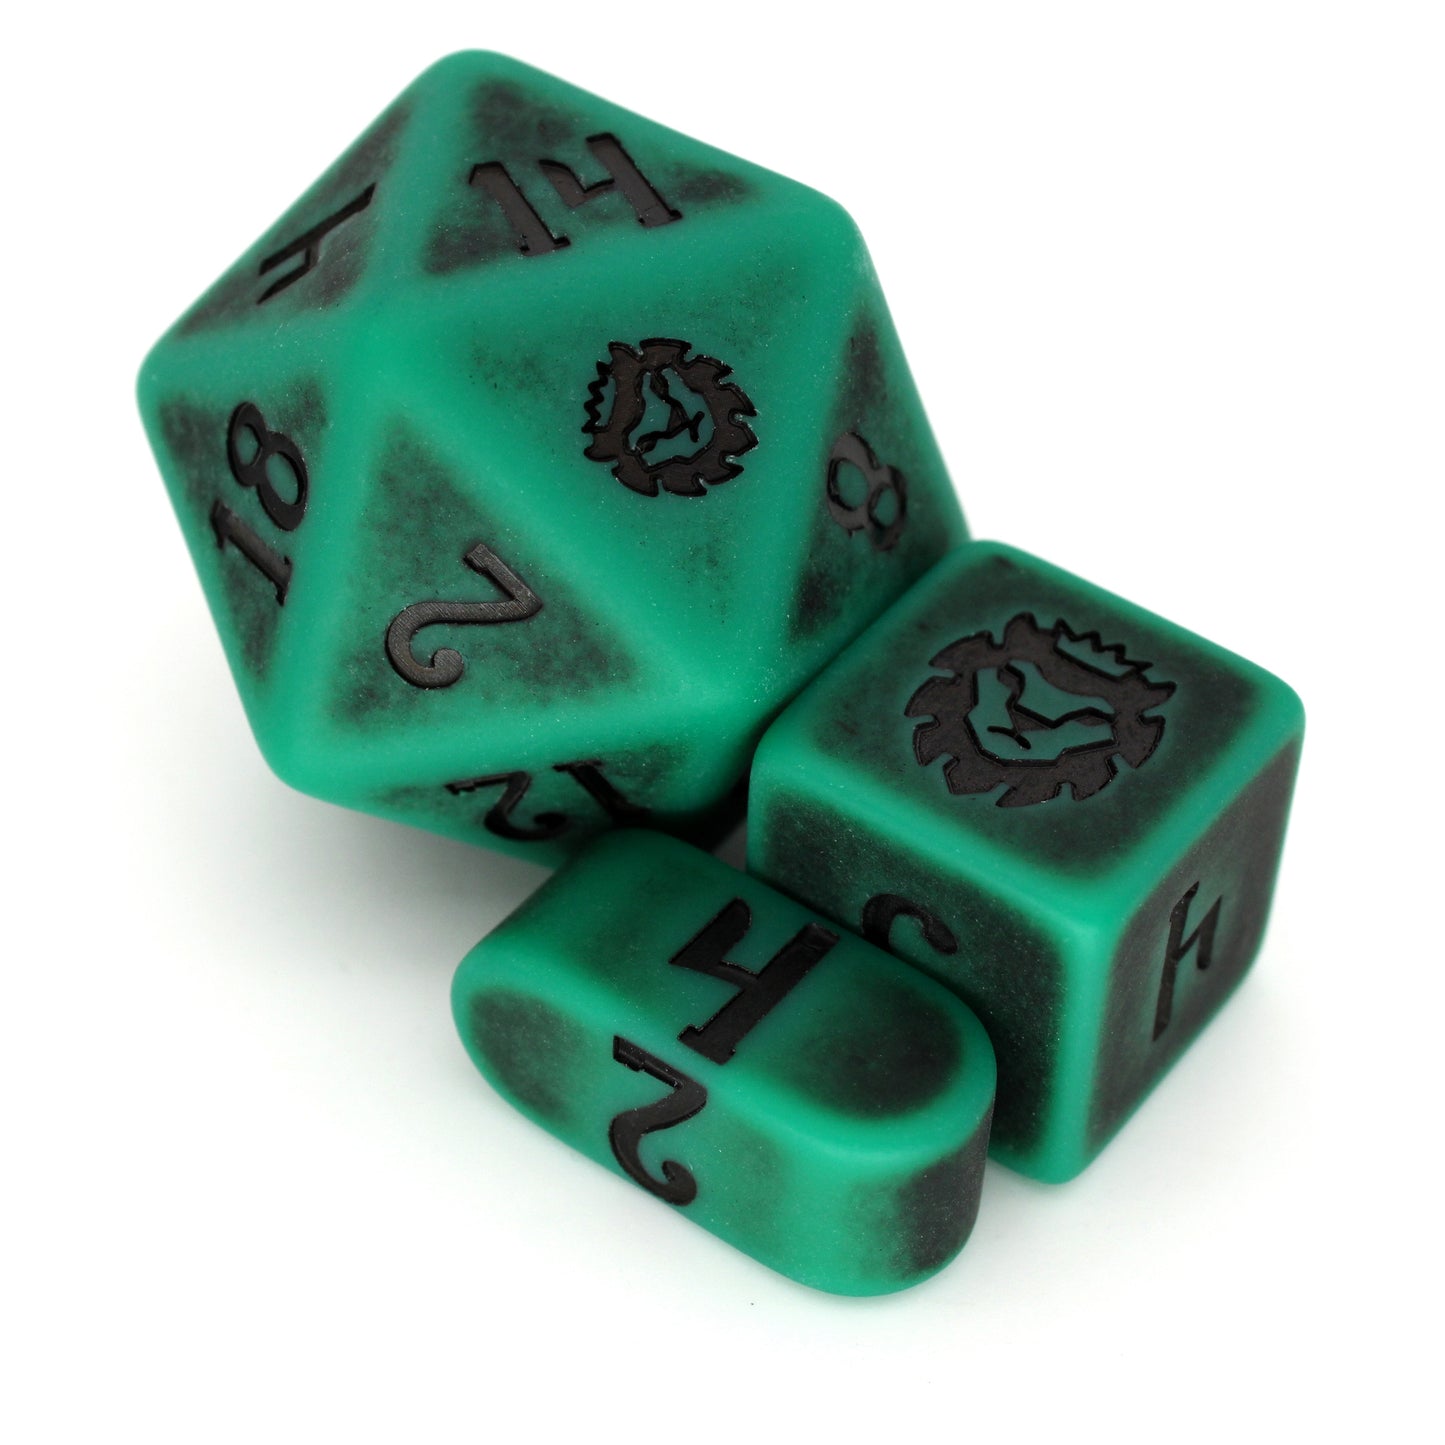 Naga Hide is a 10-piece set of brilliant green resin dice with matte finish and a darkened center pattern, inked in black.